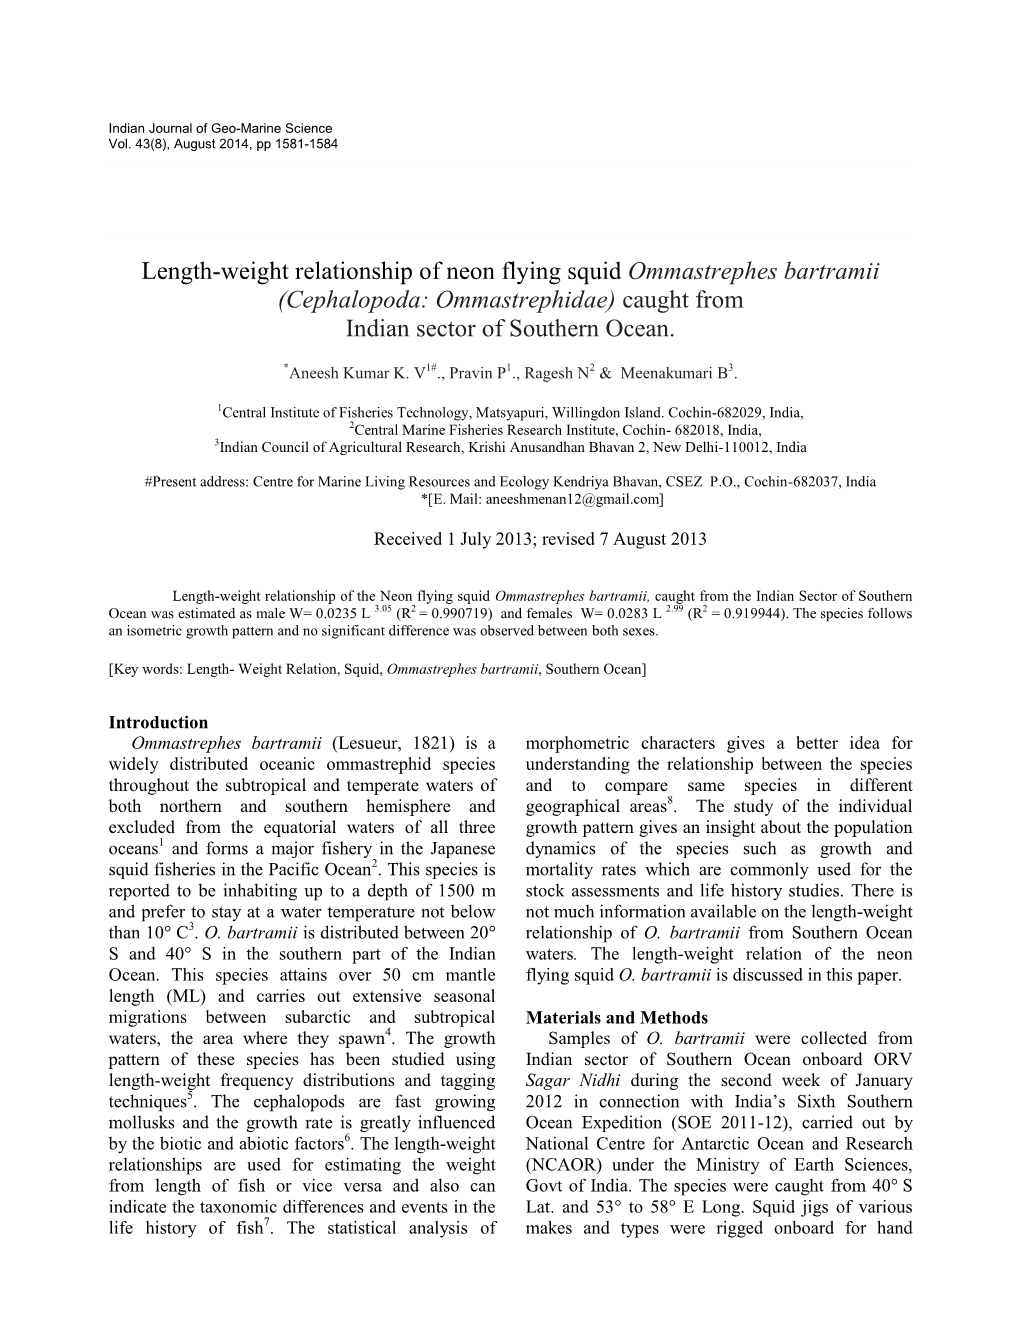 Length-Weight Relationship of Neon Flying Squid Ommastrephes Bartramii (Cephalopoda: Ommastrephidae) Caught from Indian Sector of Southern Ocean